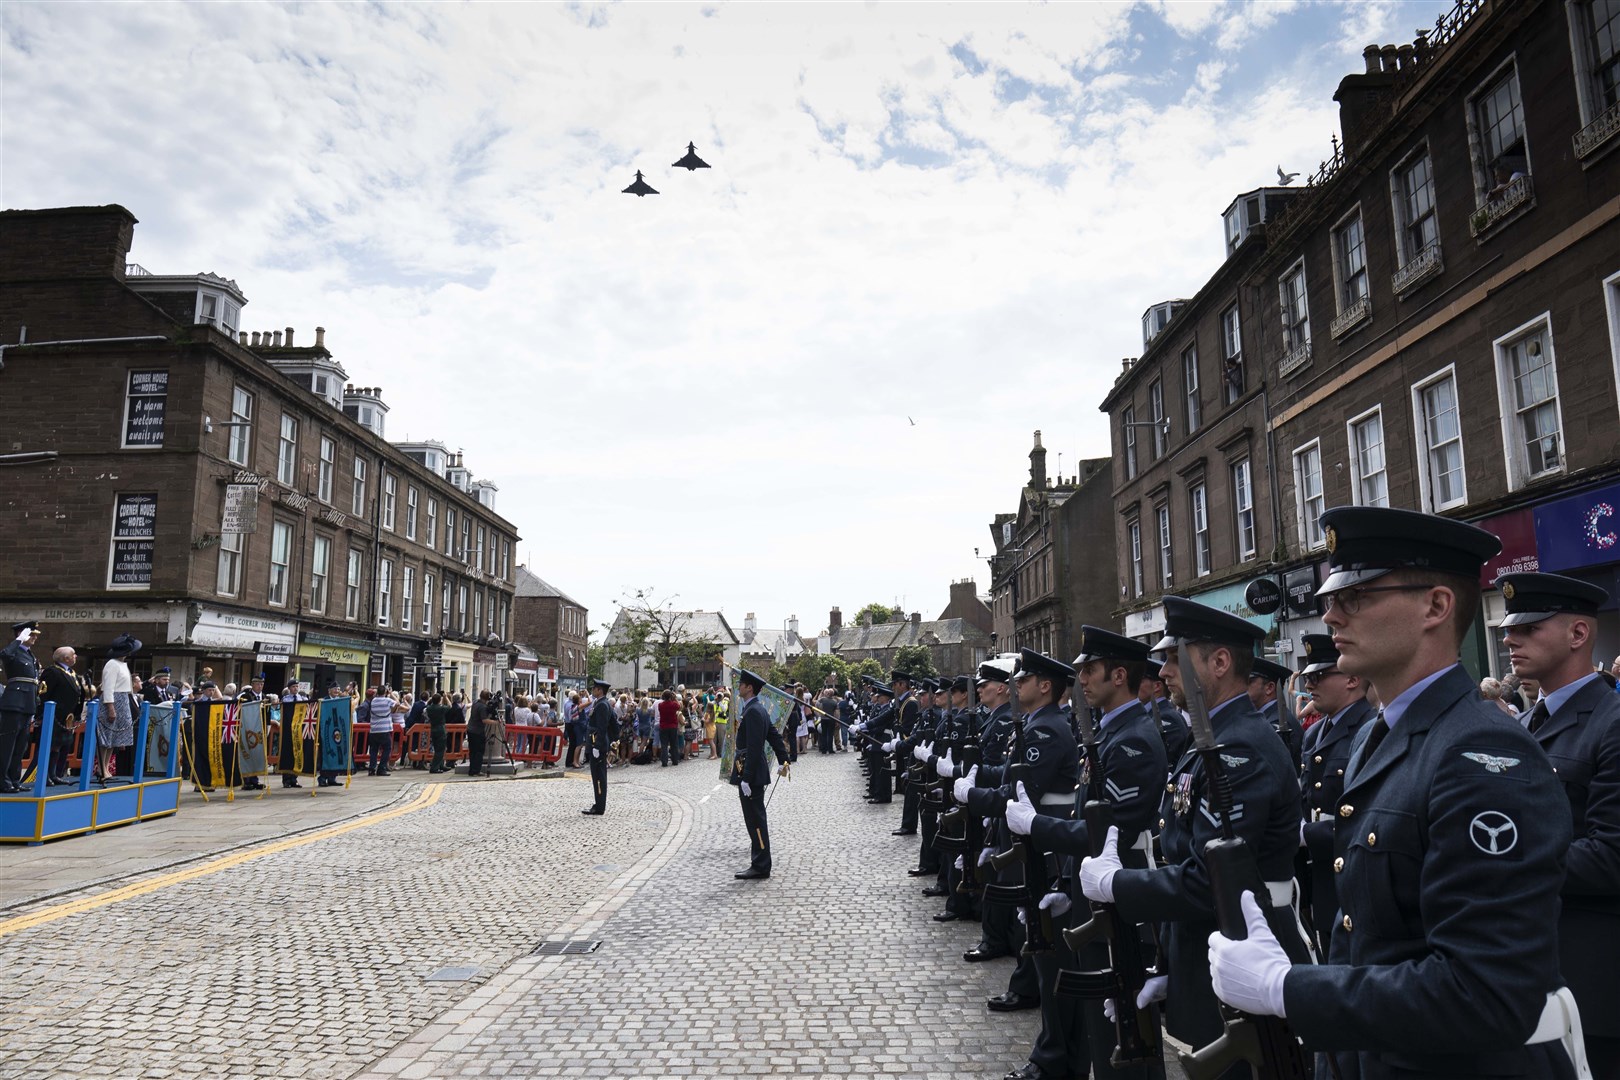 Image shows II (Army Cooperation) Squadrons’ Freedom of Angus Parade taking place in the High Street of Montrose, Angus on the 26th July 2019. The Parade consisted of 2 flights of 30 persons per flight, a standard party supported by the Central Band of the Royal Air Force as well as a flypast provided by the Lossiemouth Spt Party (LSP) to accept the Freedom of Angus from the Provost of Angus and exercise the Freedom by marching through Montrose. For the history of why the parade is taking place, The Royal Flying Corps was directed to and established 12 air stations in the Uk in the Autumn of 1912. The first was established by 2 Sqn RFC (No. II(AC) Sqn RAF) at Montrose in Feb 1913. Following ground-breaking deployments to Ireland and England and the setting of several distance and altitude records, the Sqn left Montrose for France and World War 1 in Aug 1914 never to return. In recognition of its contribution to the development of Airpower whilst stationed at Montrose and to the security and Defence of the UK since its formation in 1912, Angus Council has conferred the Freedom of Angus on II (AC) Sqn. Originator: Sqn Ldr Gibson Section: 2 Sqn Ext: *For more information contact Photographic Section, RAF Lossiemouth, IV31 6SD. Tel: 01343 817191